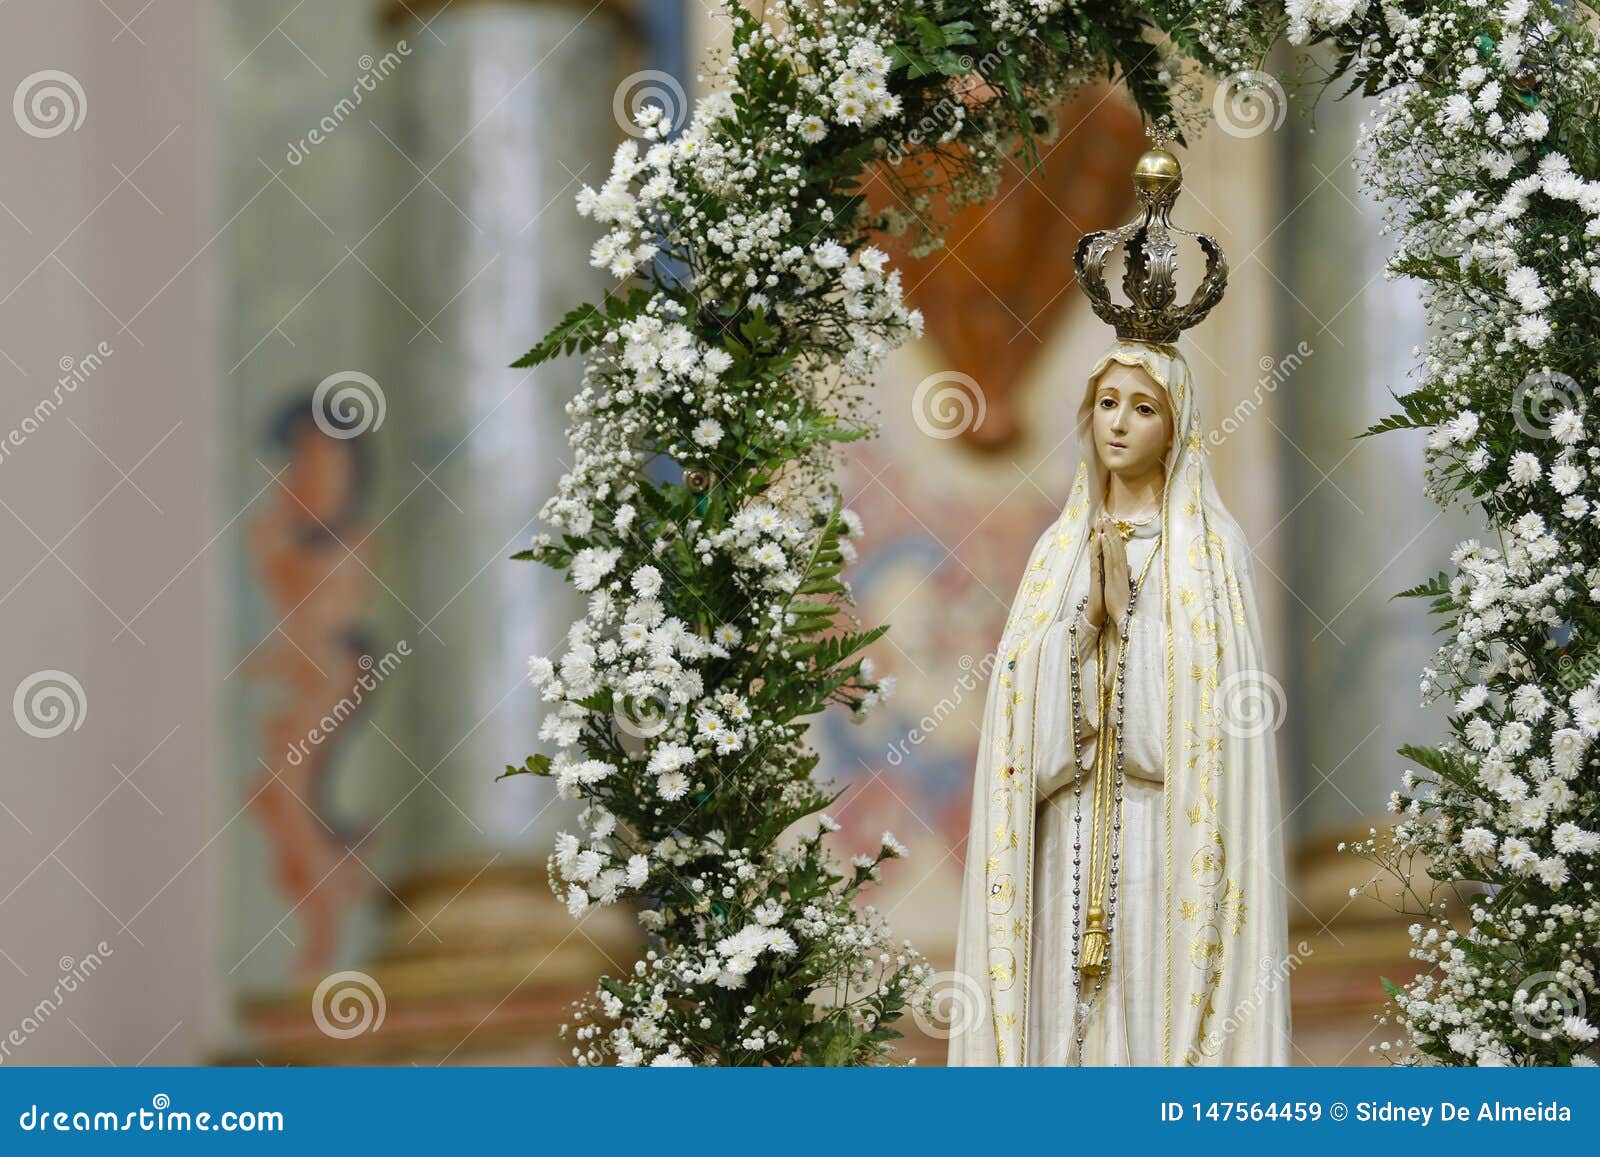 statue of the image of our lady of fatima